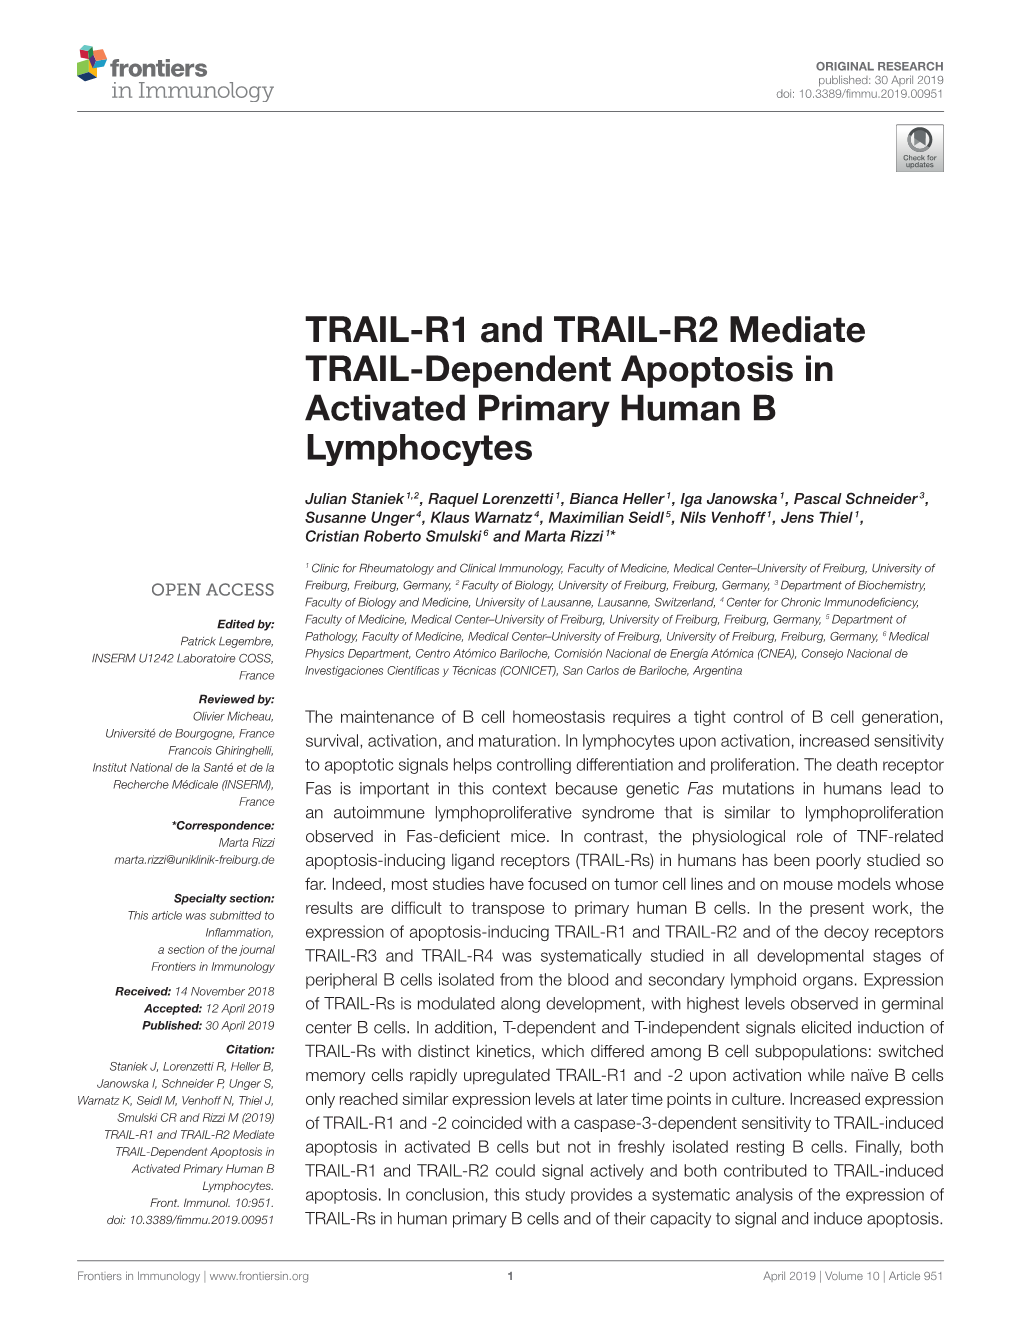 TRAIL-R1 and TRAIL-R2 Mediate TRAIL-Dependent Apoptosis in Activated Primary Human B Lymphocytes